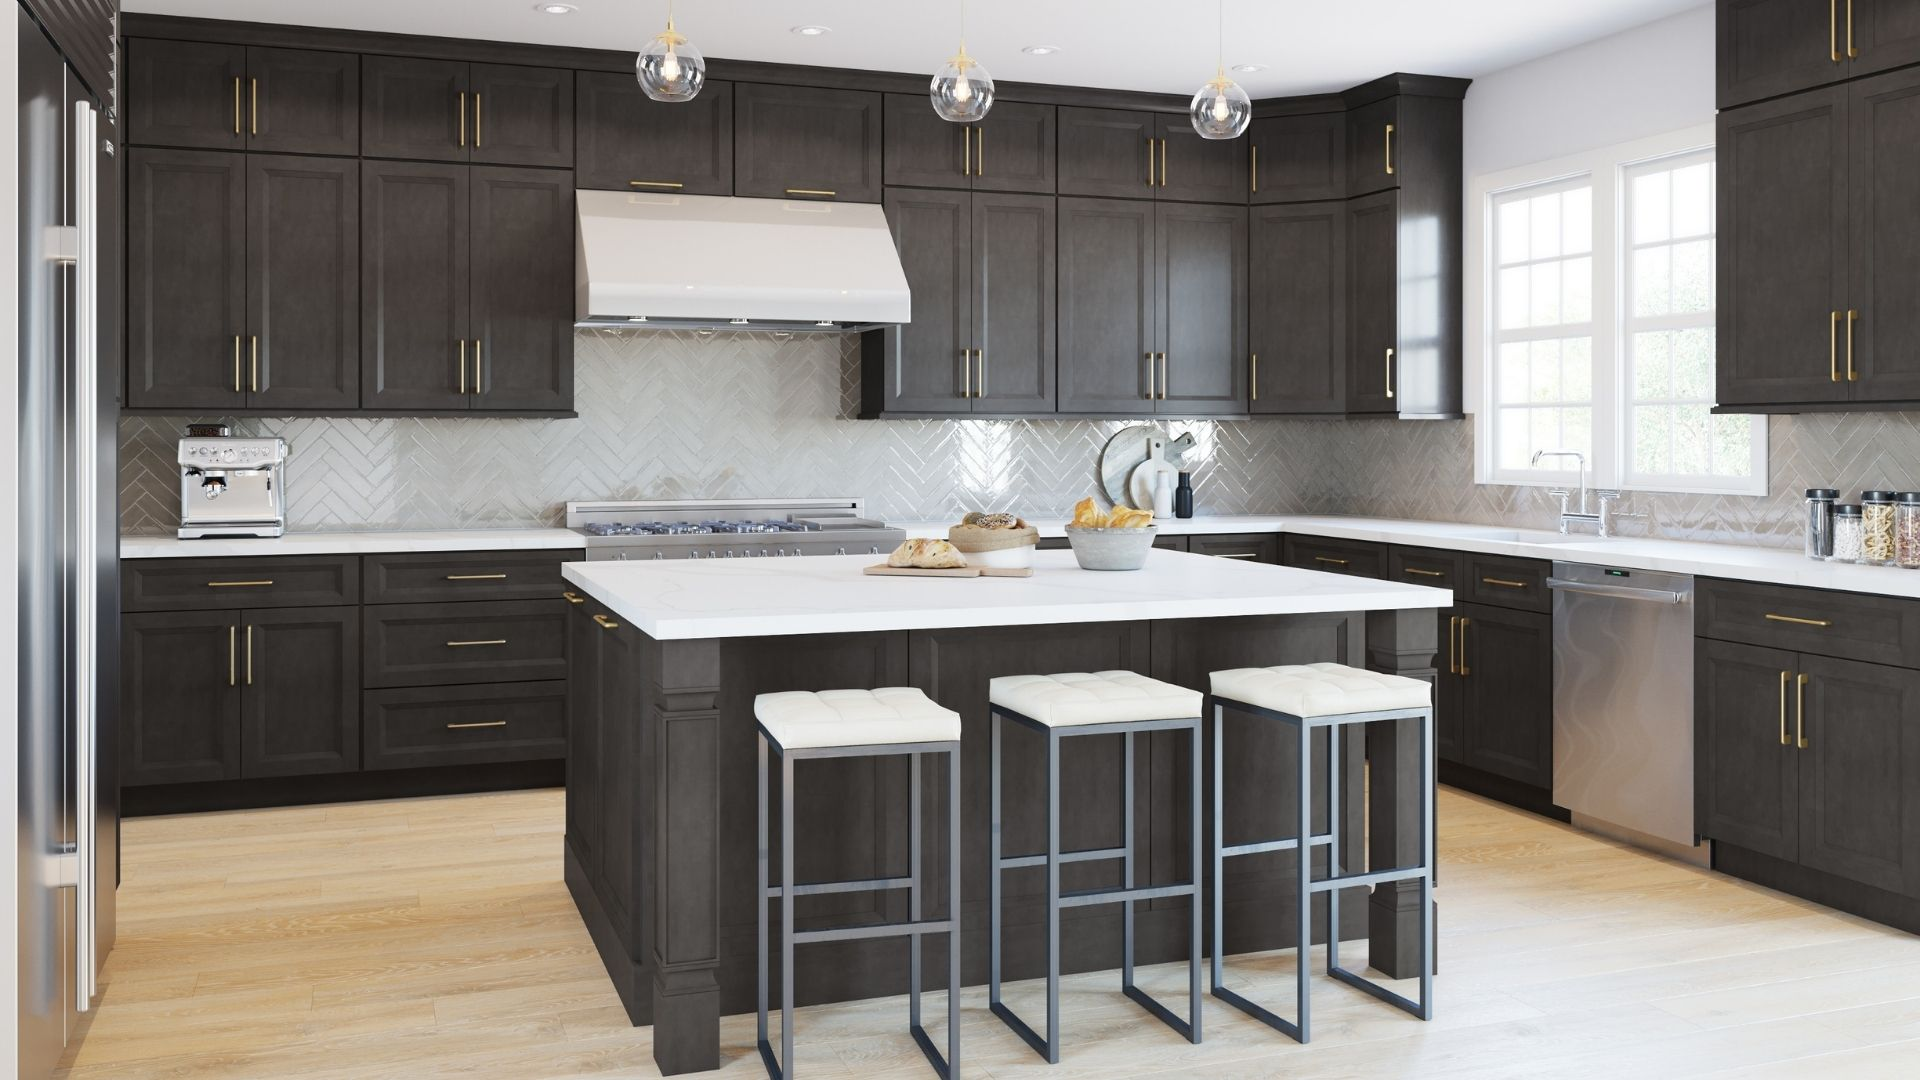 Popular Collections and Styles in Fabuwood Cabinets